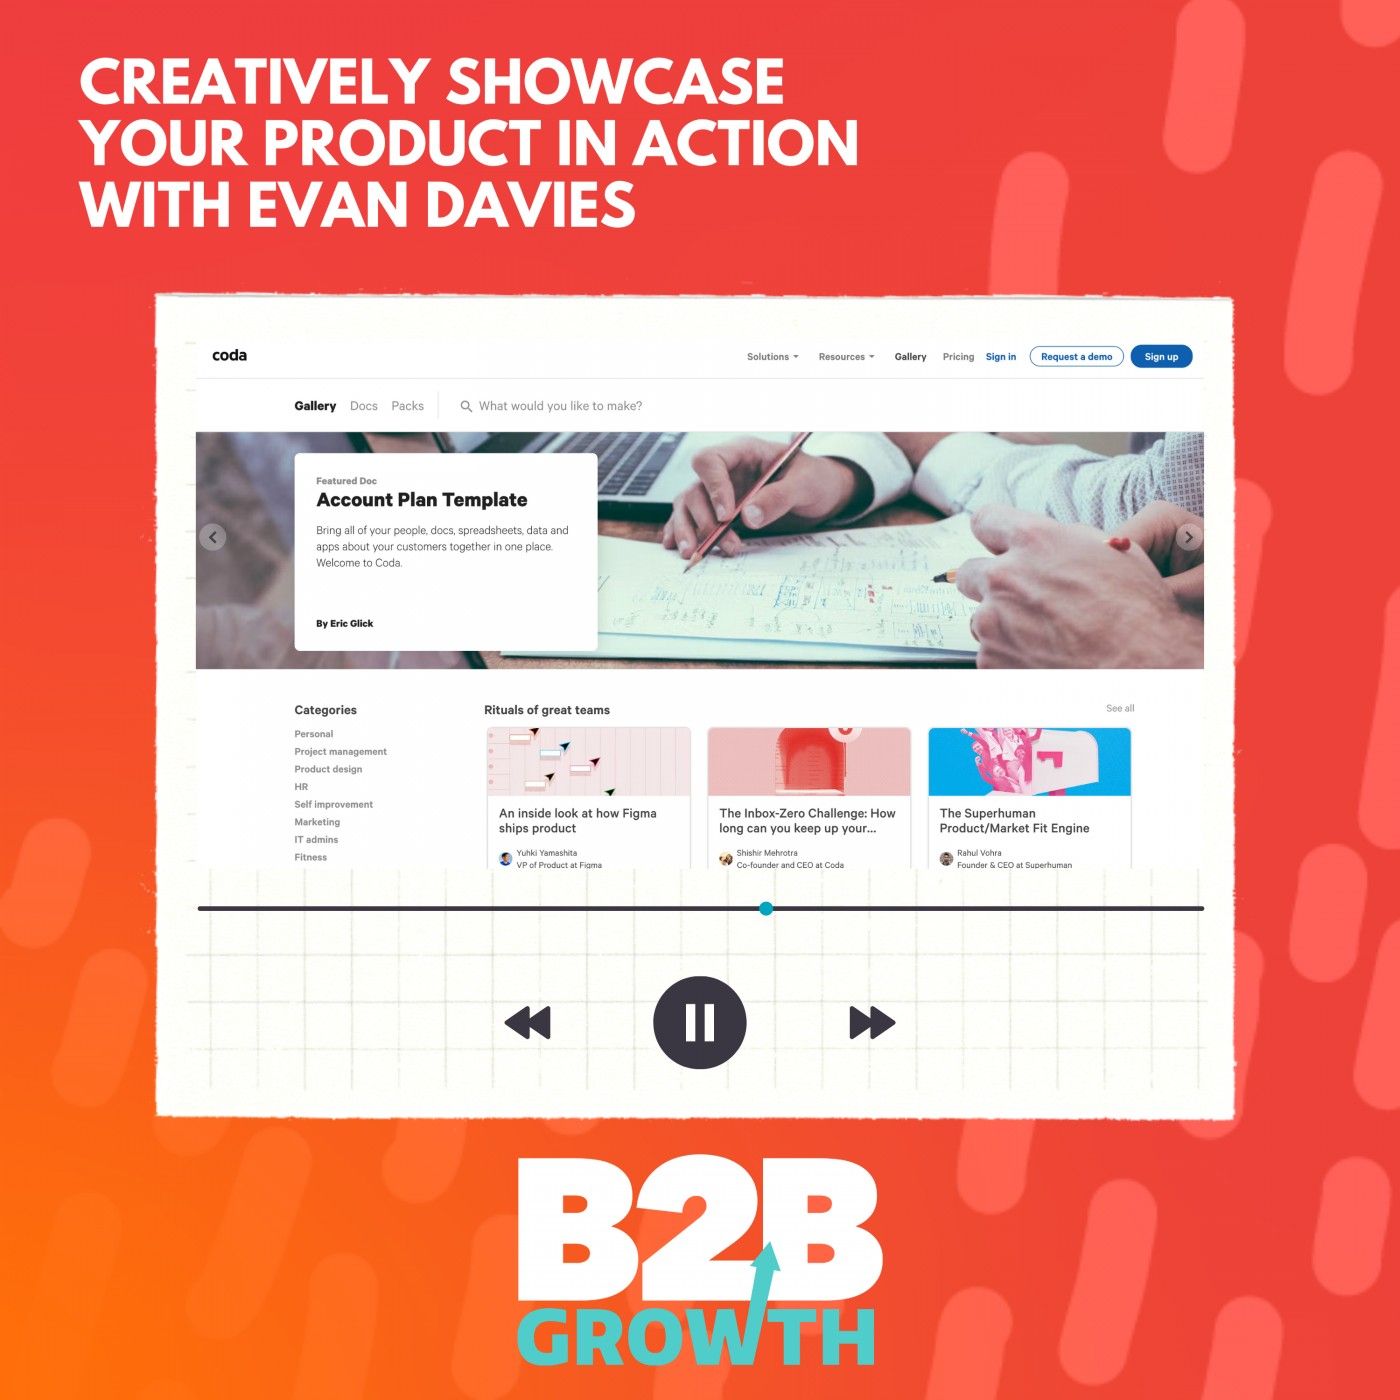 Creatively Showcase Your Product in Action, with Evan Davies